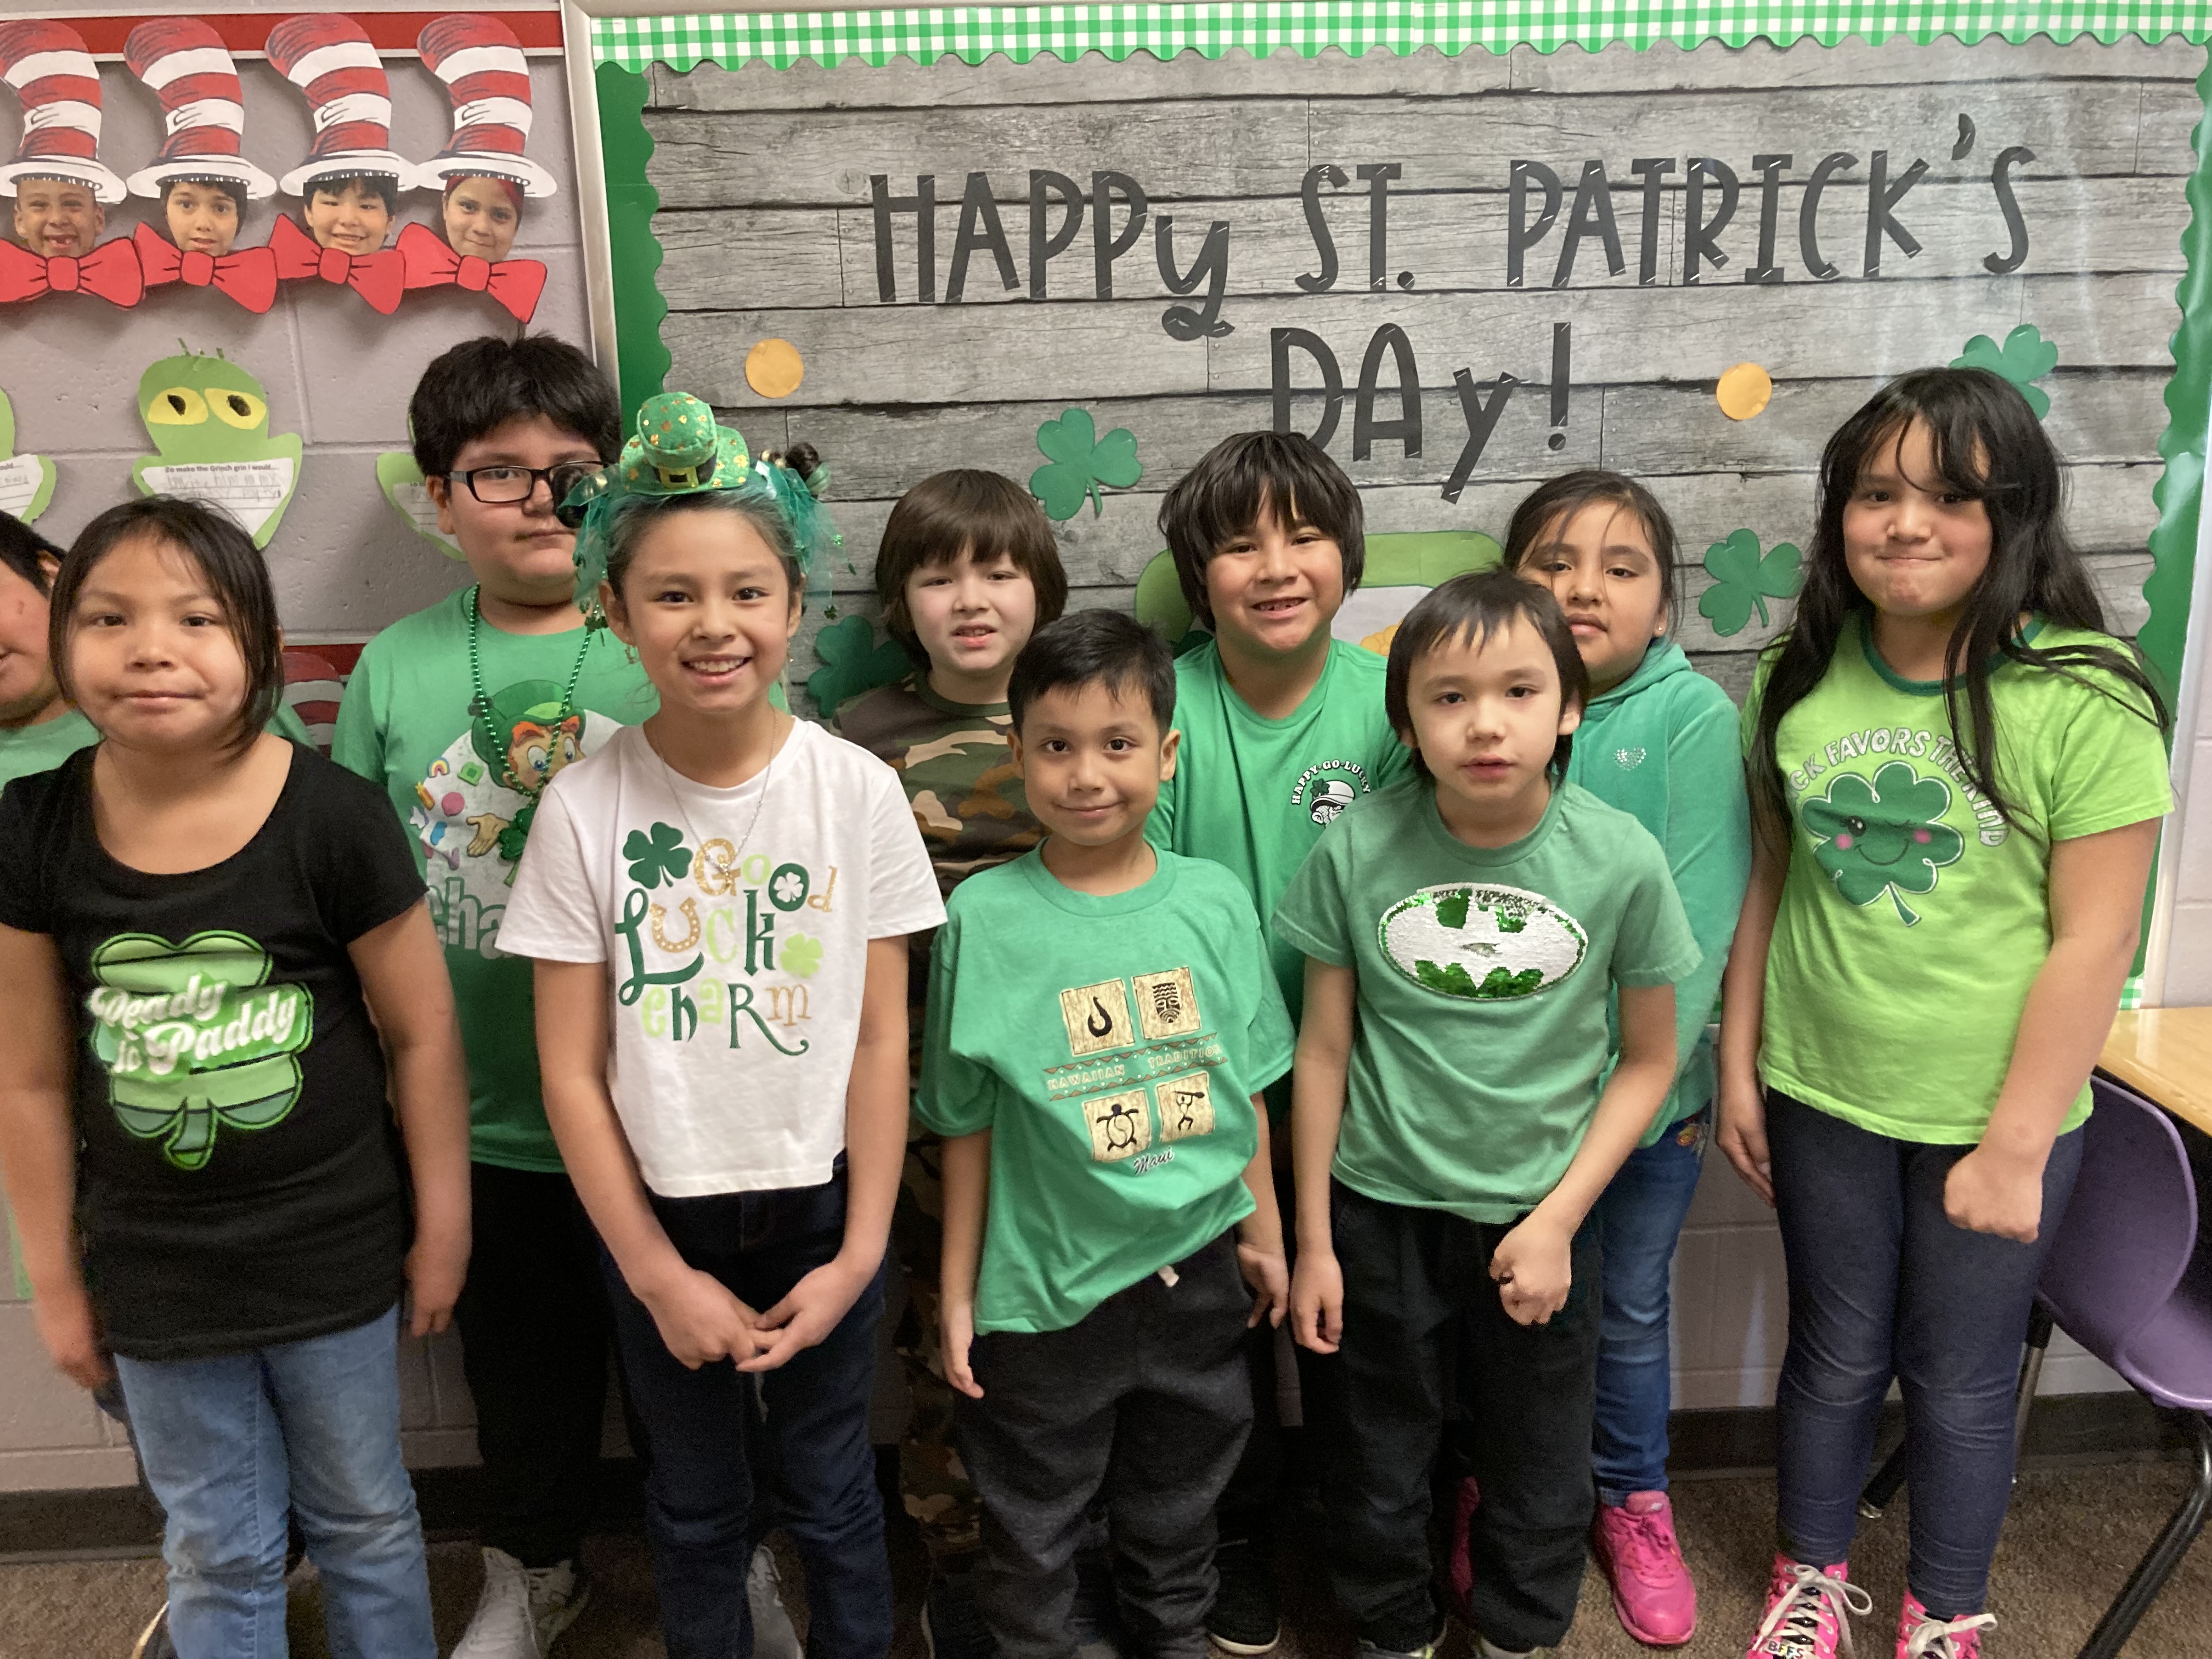 Group 2 of Elementary Students wearing St. Patrick's Day shirts